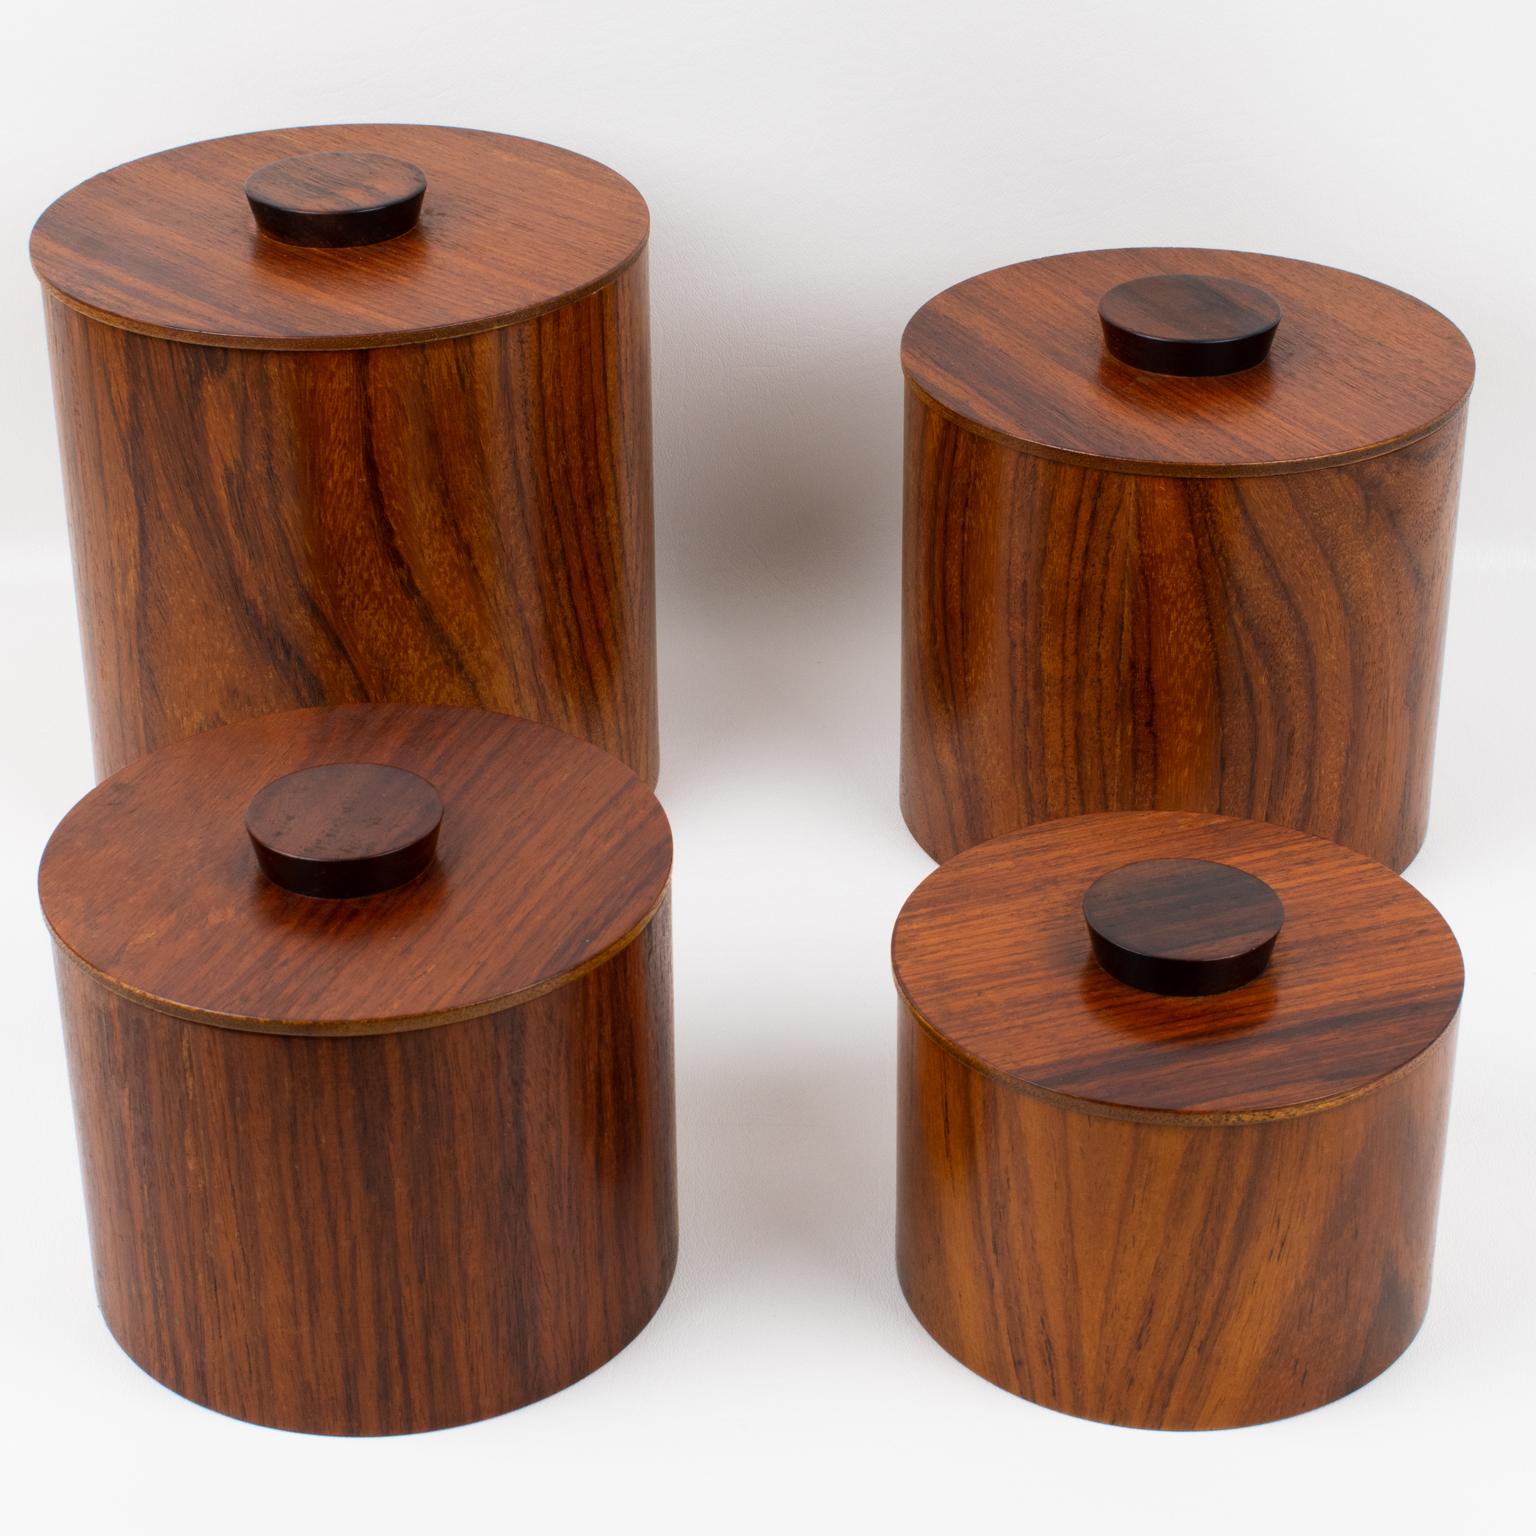 Elegant Mid-Century-Modern 1960s kitchen canister boxes, set of four pieces. Set of four Japanese modernist teak wood kitchen canisters. This sleek teak box set is perfect for any kitchen. Each box is unique and made with turned wood with a